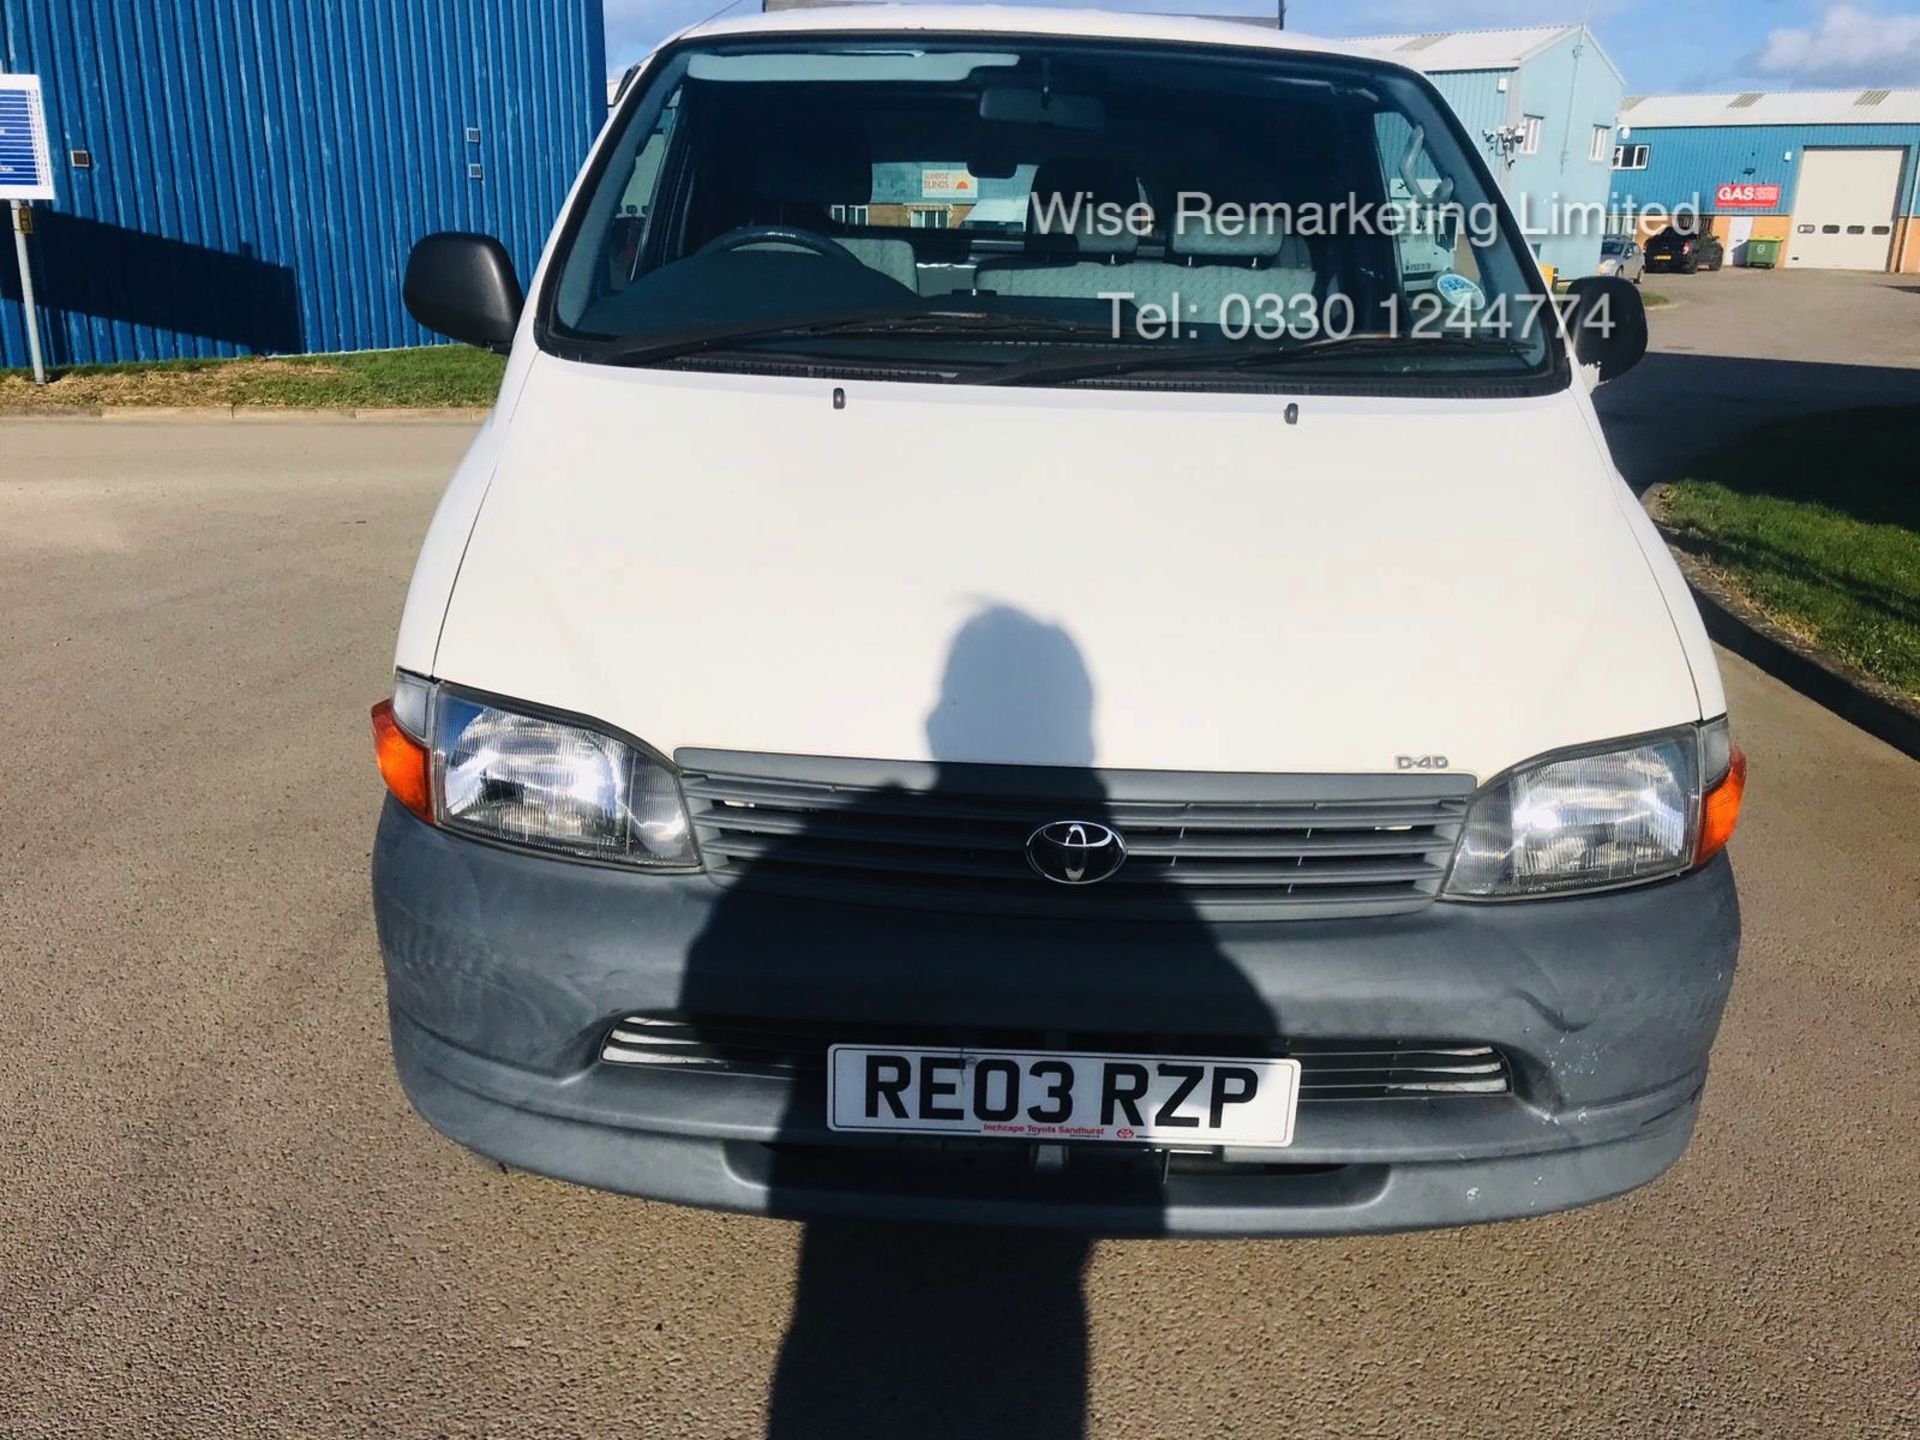 (RESERVE MET)Toyota Hiace 300 GS 2.5 D4D - 2003 03 Reg - 1 Keeper From New - 3 Seater - Roof Rack - Image 3 of 15